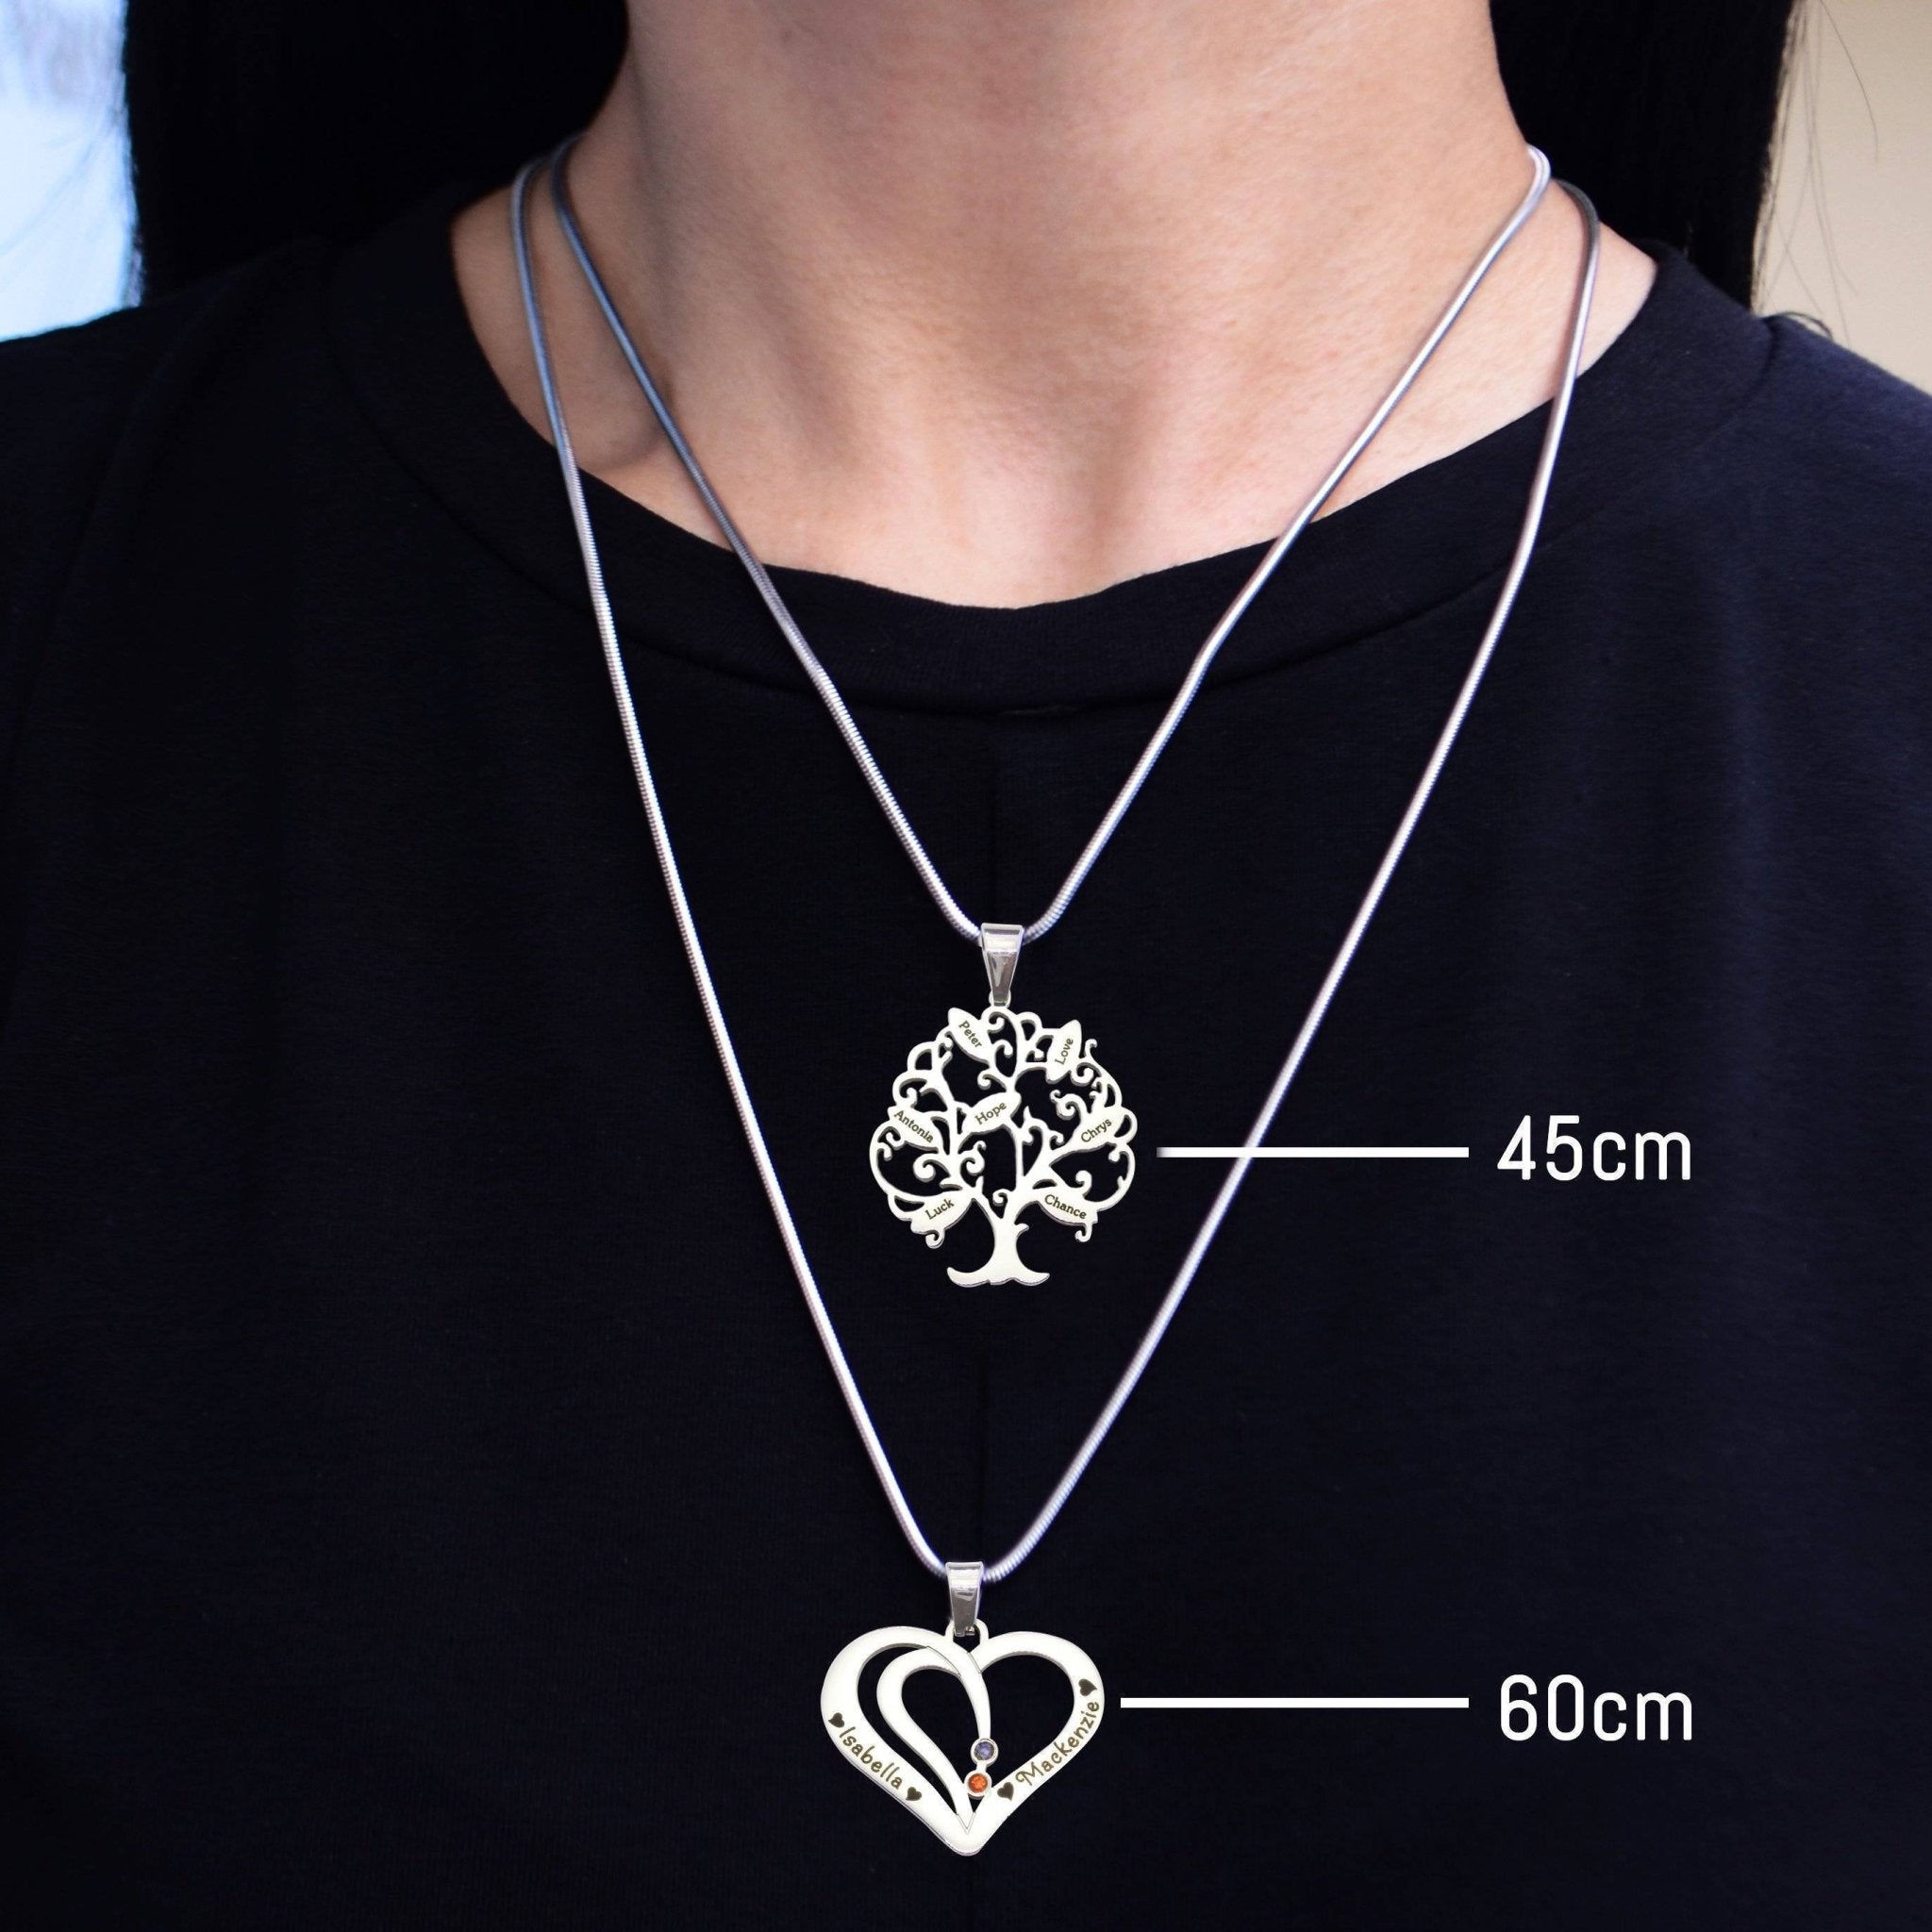 ADDITIONAL Stolen Heart Cut Out Necklace - Extras